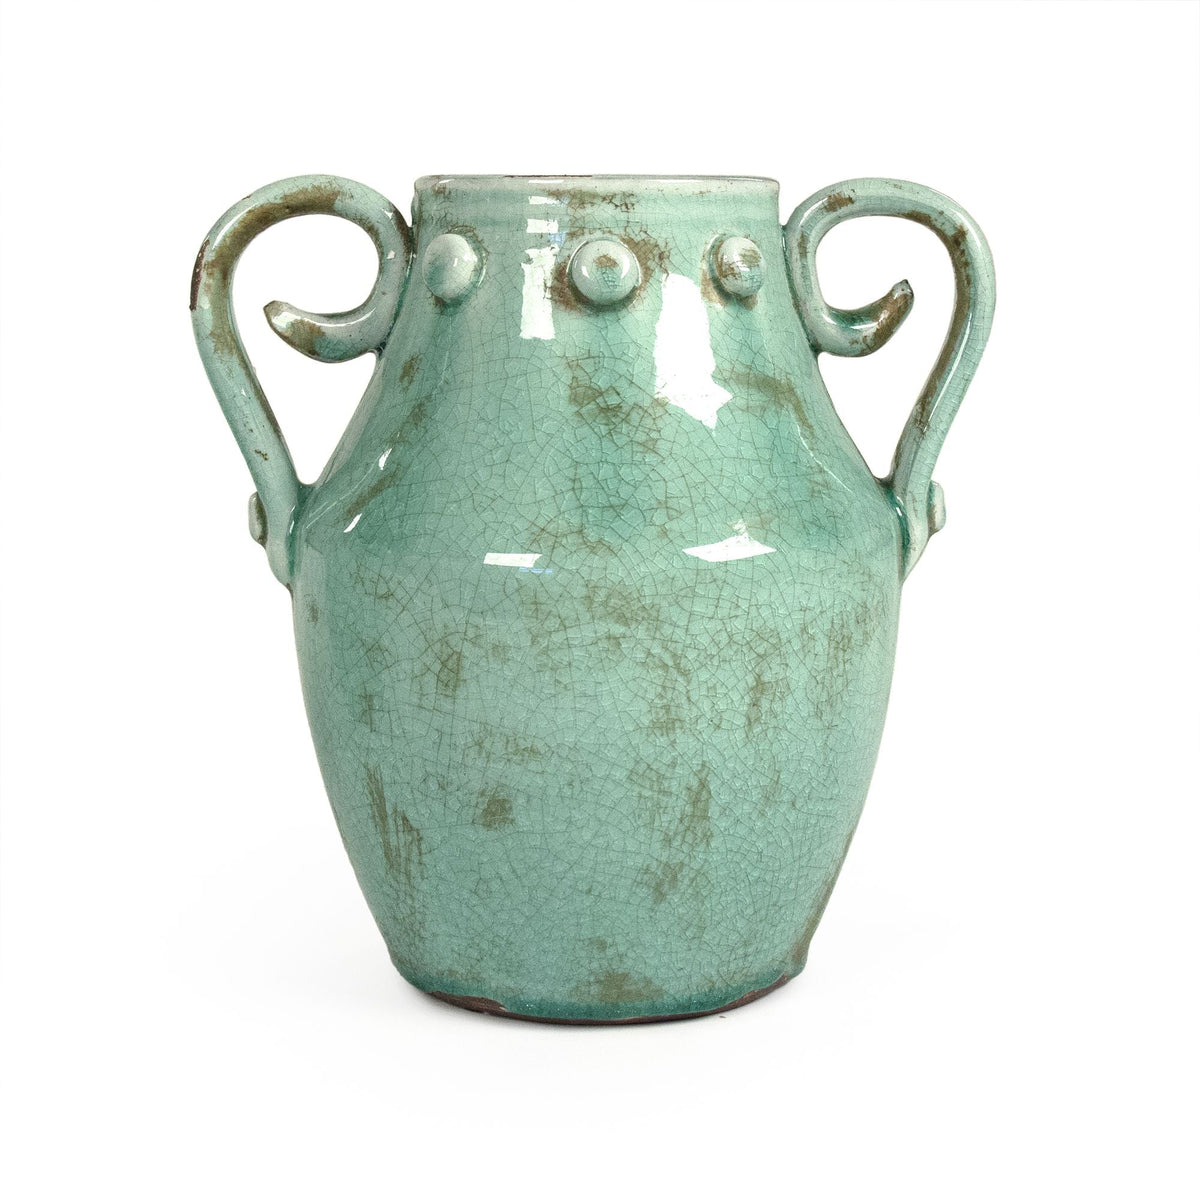 Distressed Turquoise Vase Small by Zentique